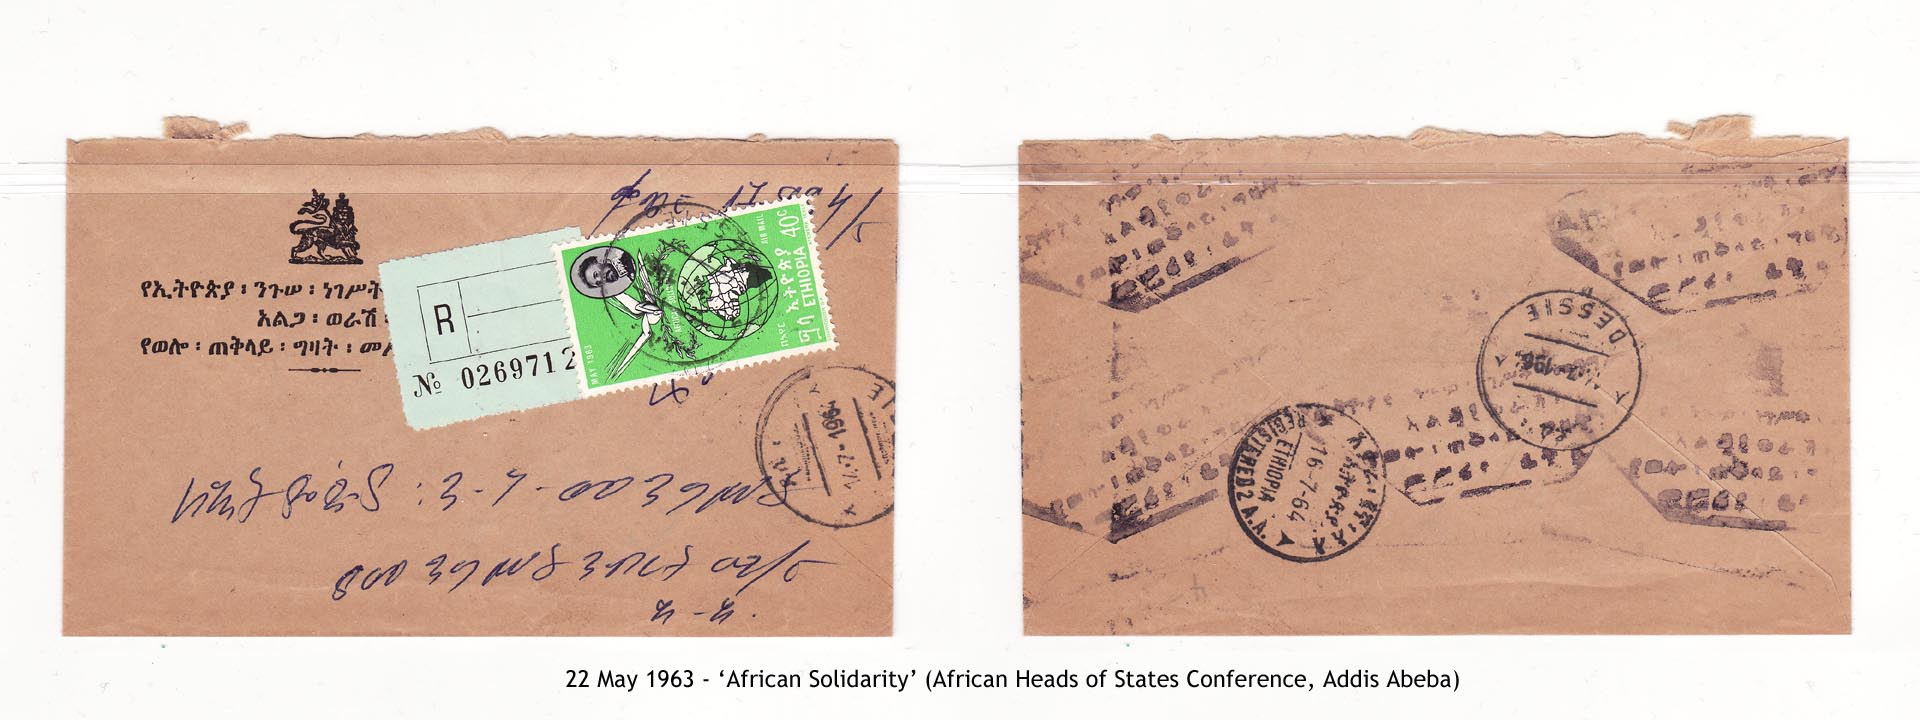 19630522 – African Solidarity (African Heads of States Conference, Addis Abeba)